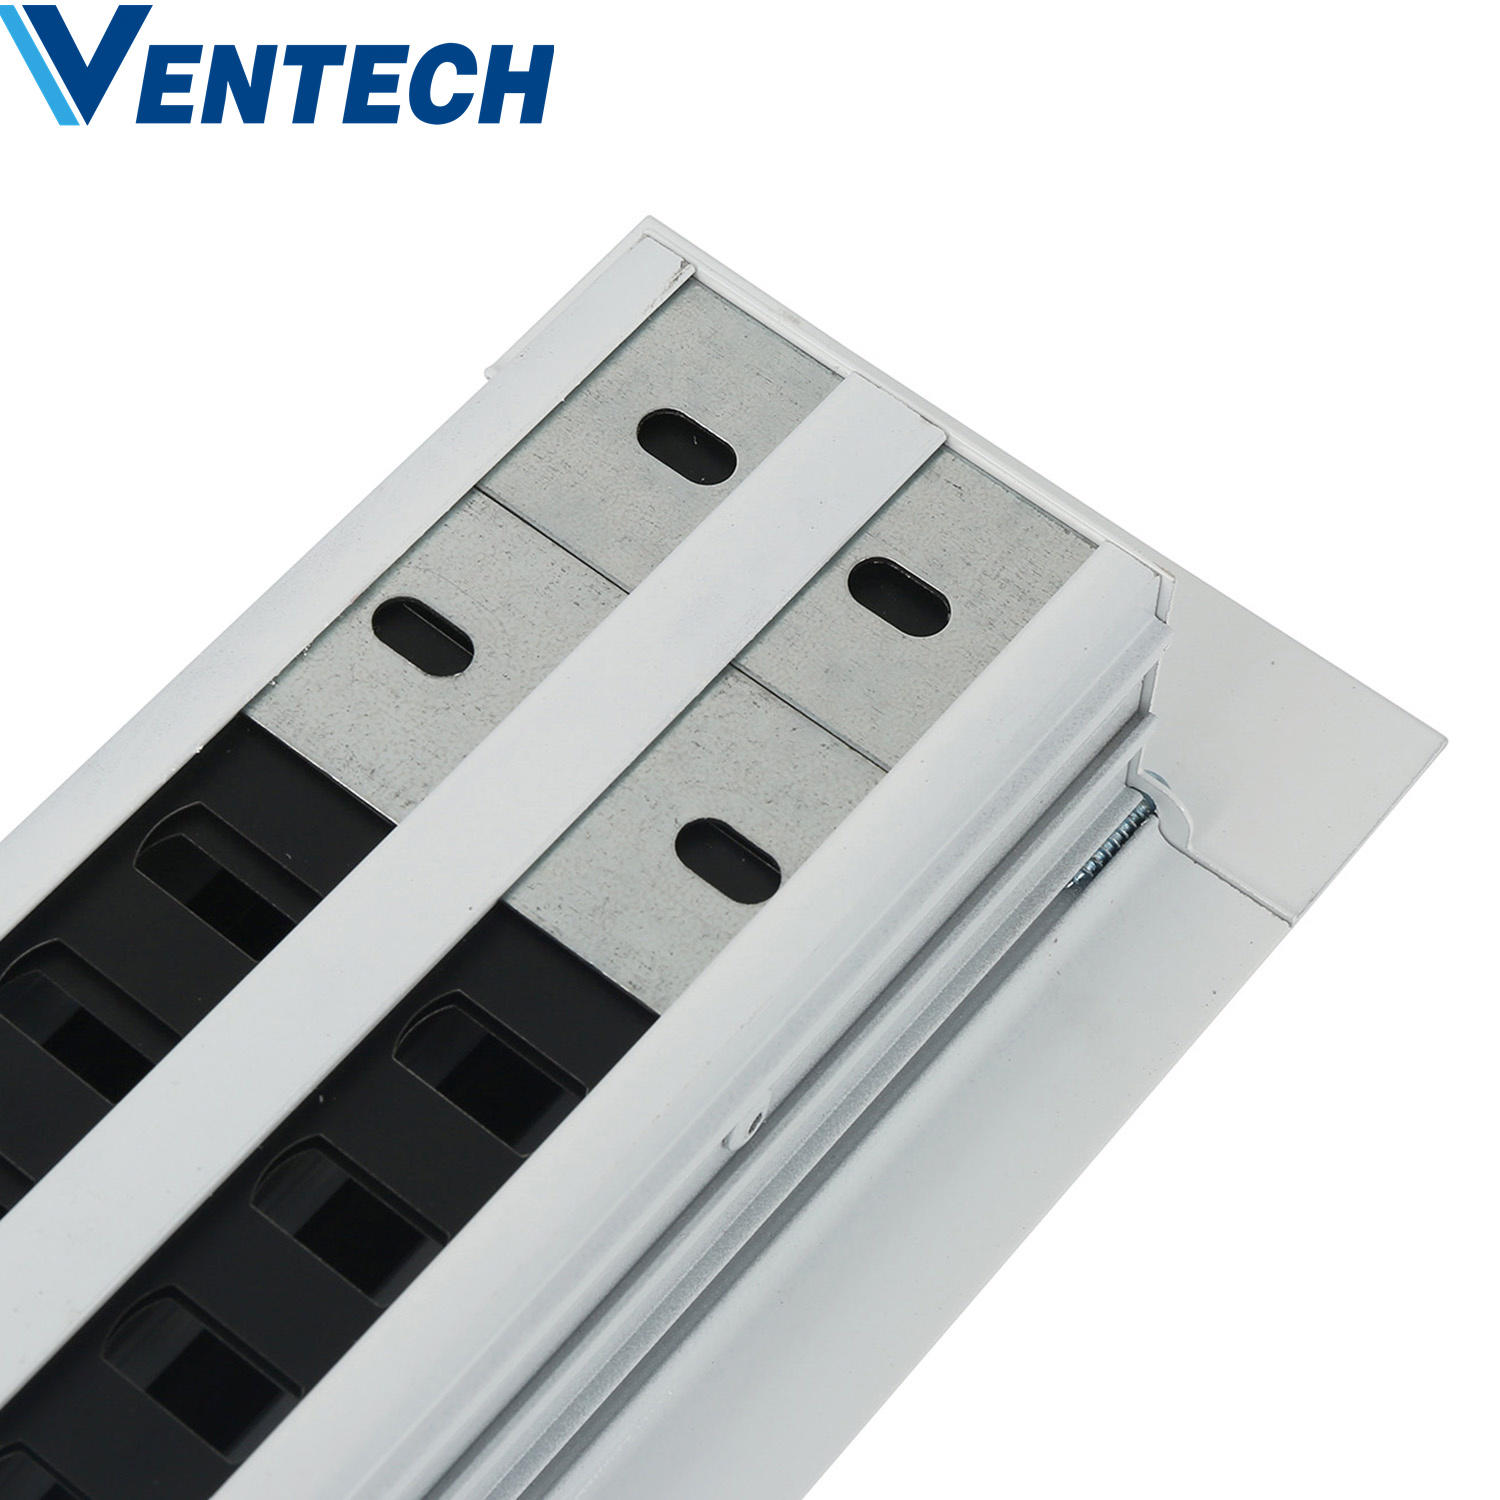 Hvac Aluminum Exhaust Air Ventilation Ceiling Duct Conditioning Diffuser Supply Linear Slot VAV Diffusers Price With Plenum Box